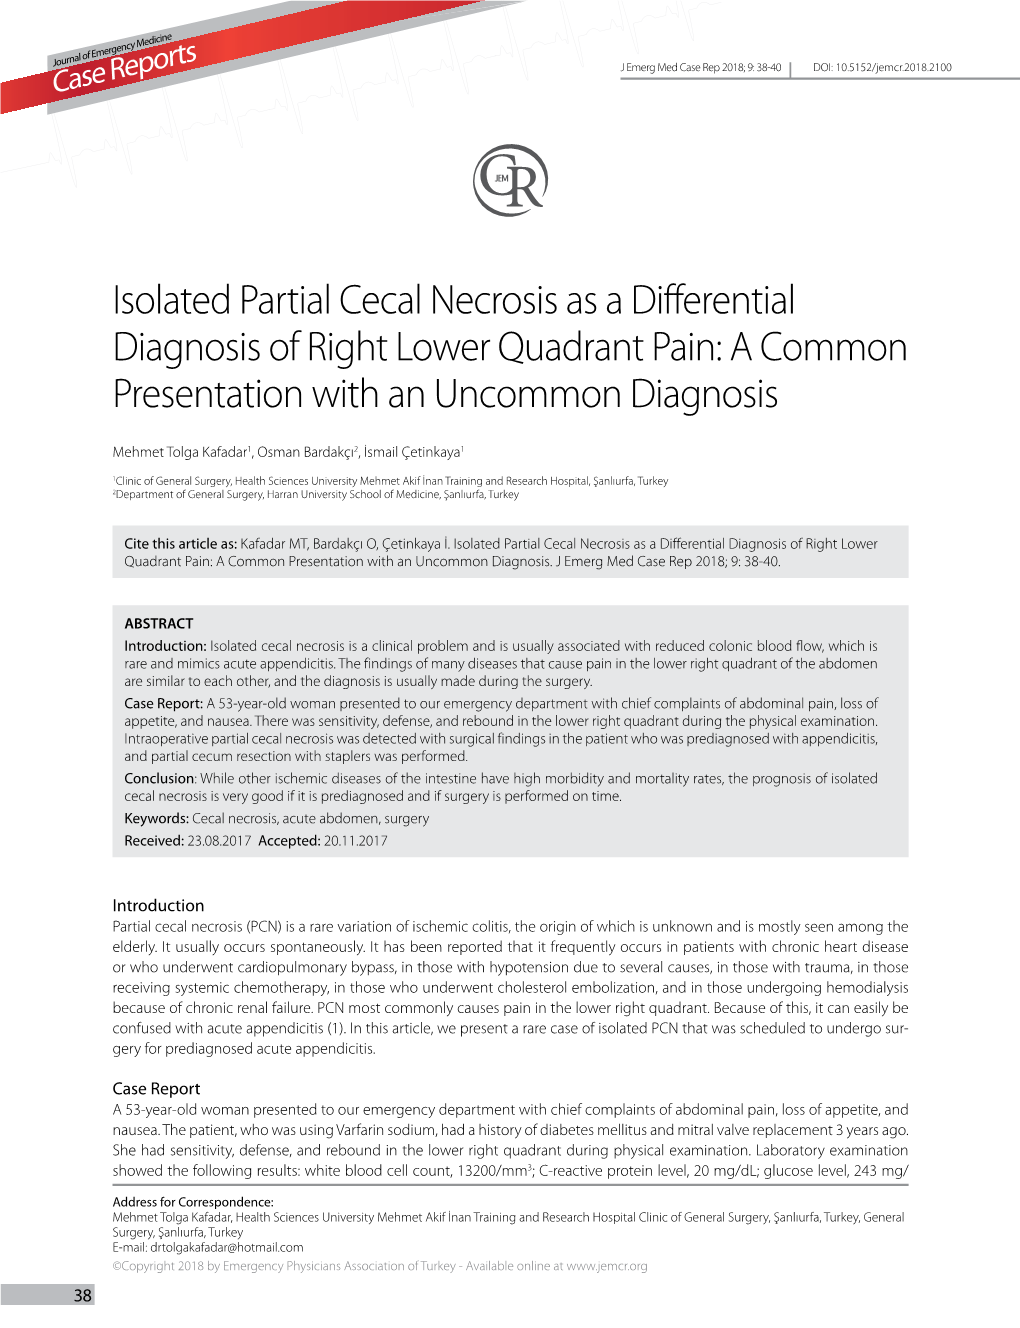 Isolated Partial Cecal Necrosis As a Differential Diagnosis of Right Lower Quadrant Pain: a Common Presentation with an Uncommon Diagnosis